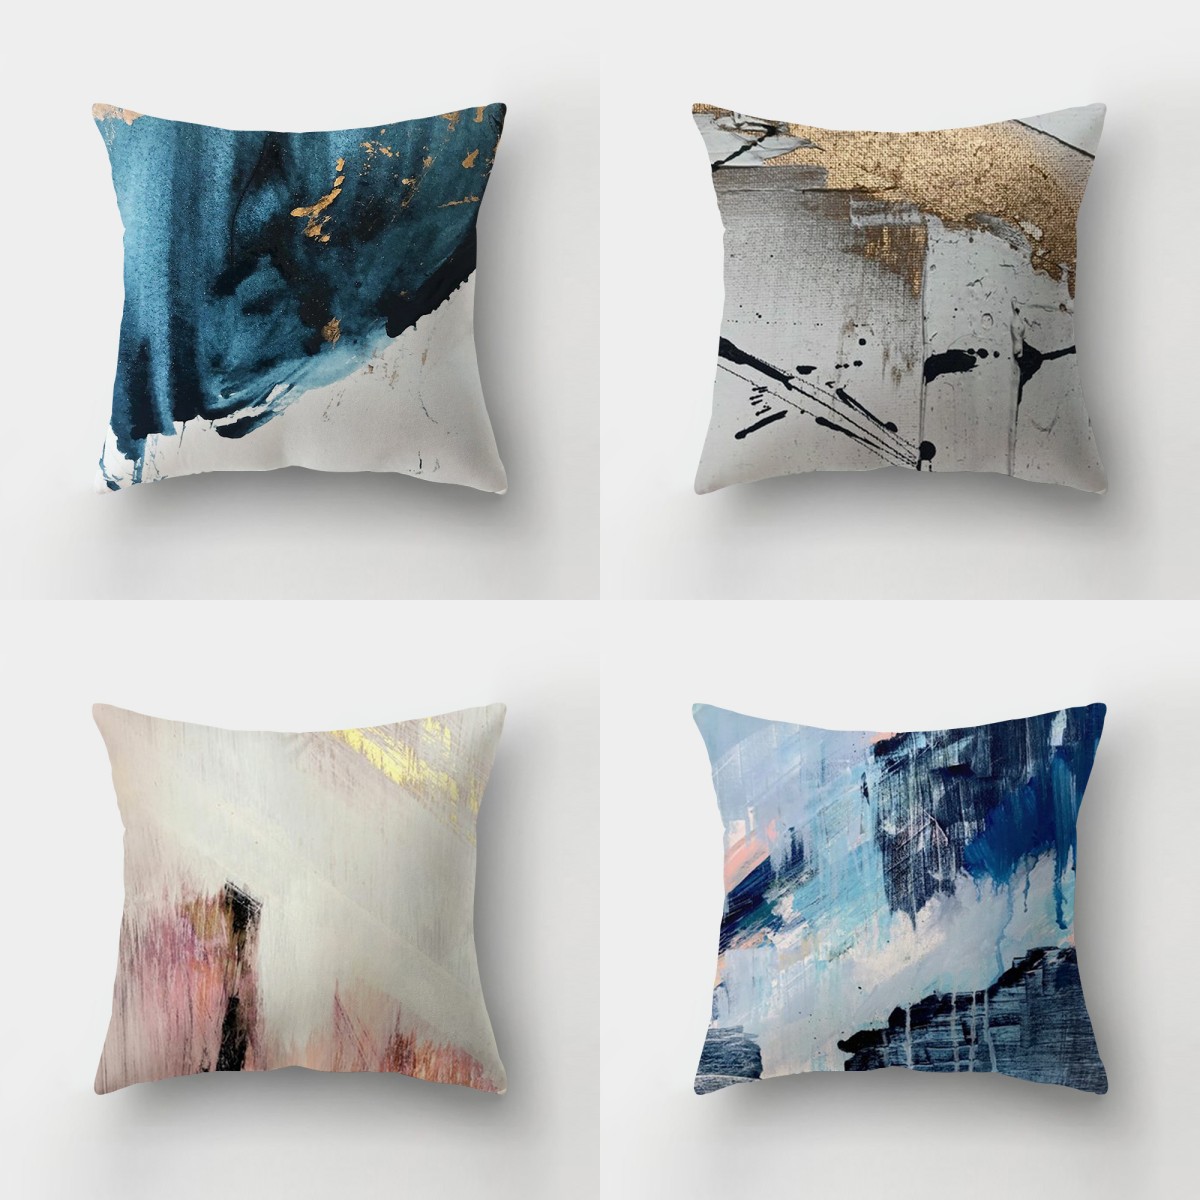  Boho Throw Pillow Covers 12x20 Decorative Pillows for